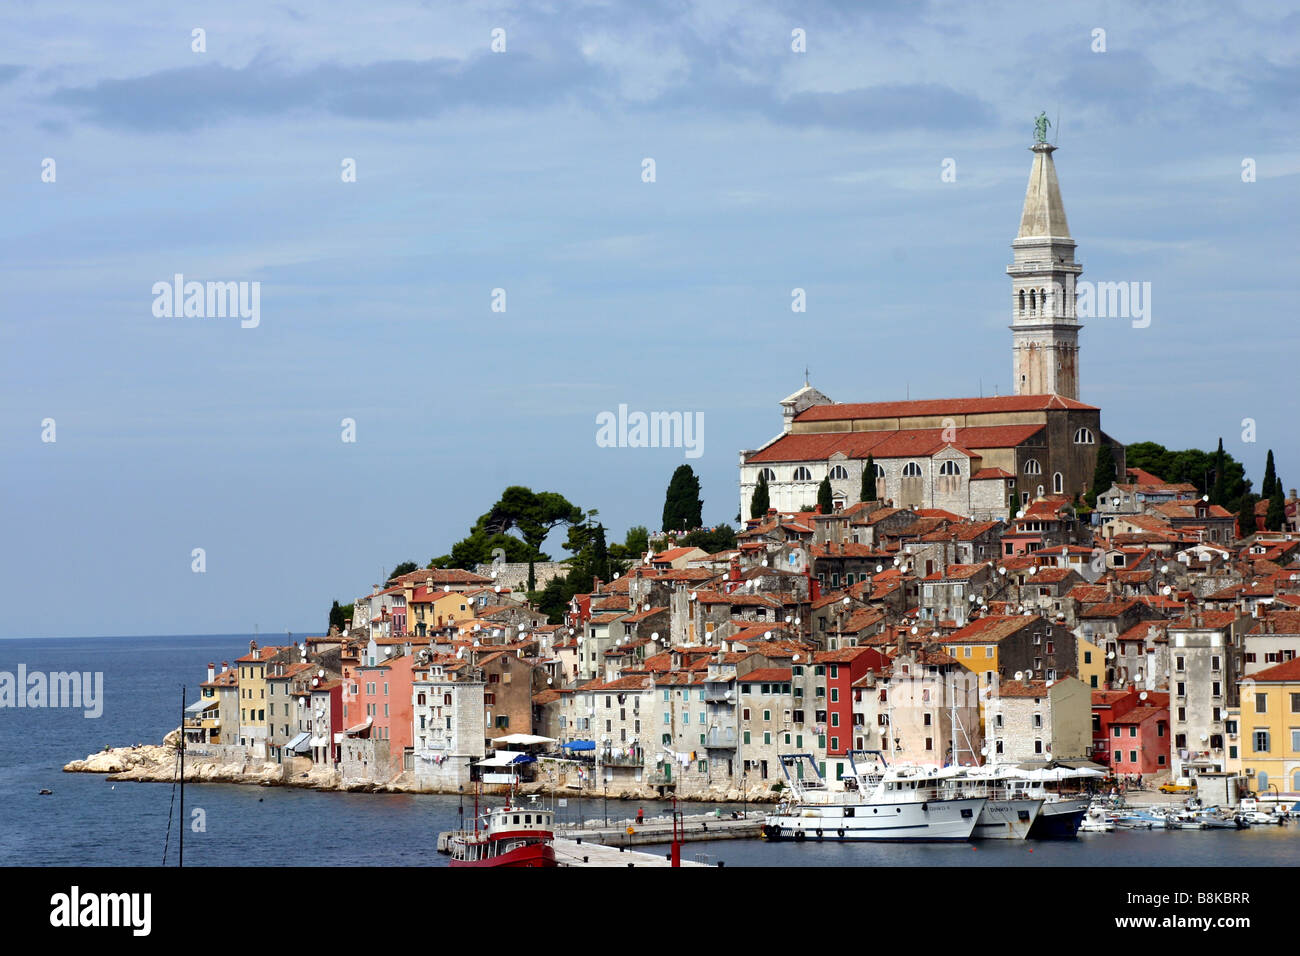 Church of St. Euphemia and Old Town of Rovinj in Region of Istria in Croatia Stock Photo